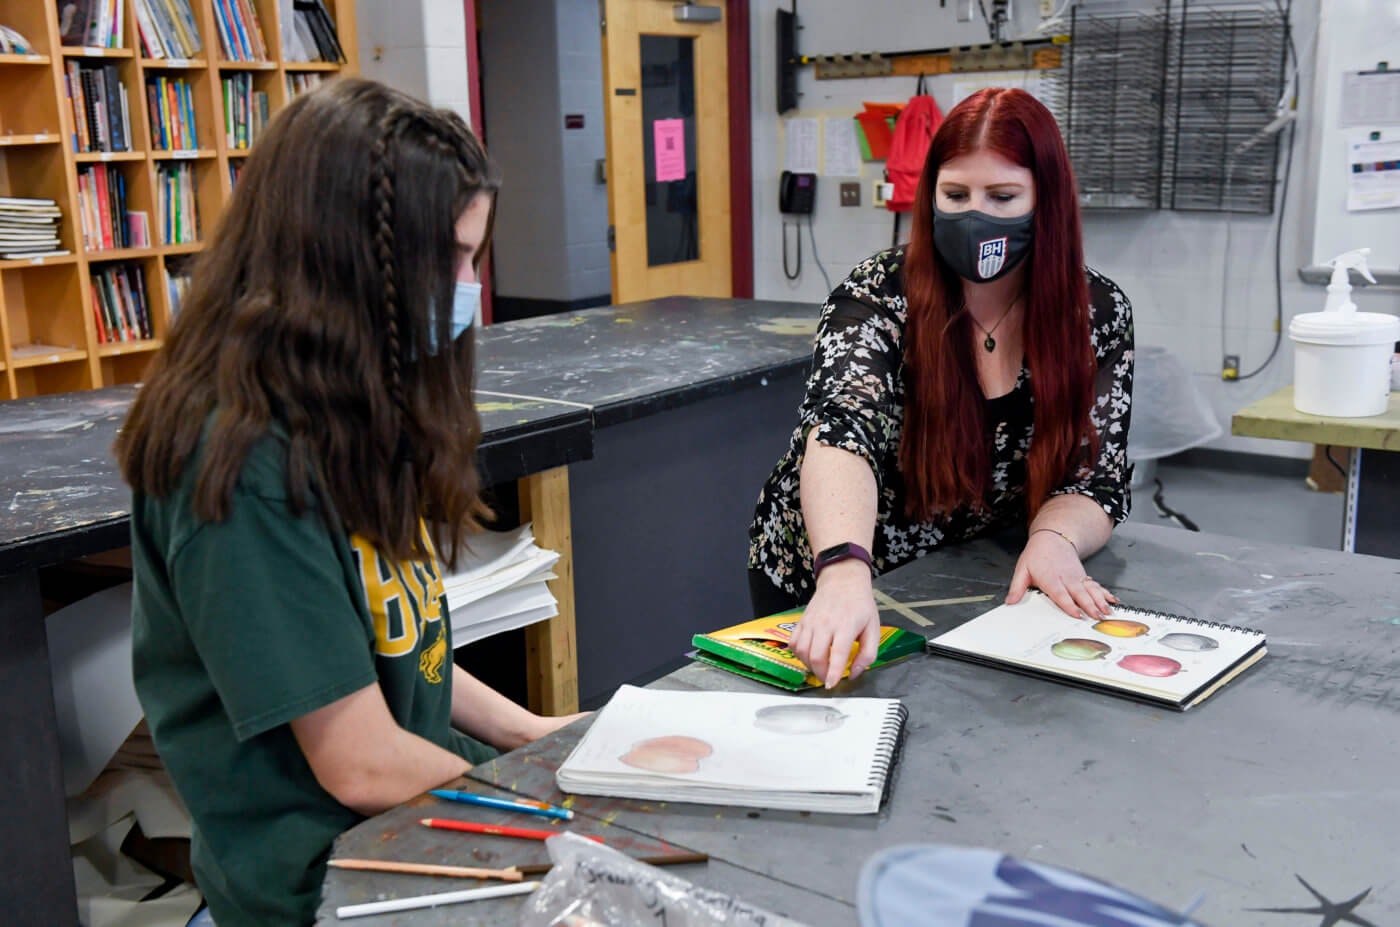 Angelina DeChristopher, a ninth grade student, works with art teacher Jennilee Miller at Brandywine Heights High School in Longswamp Township, March 1, 2021. (Photo by Ben Hasty/MediaNews Group/Reading Eagle via Getty Images)